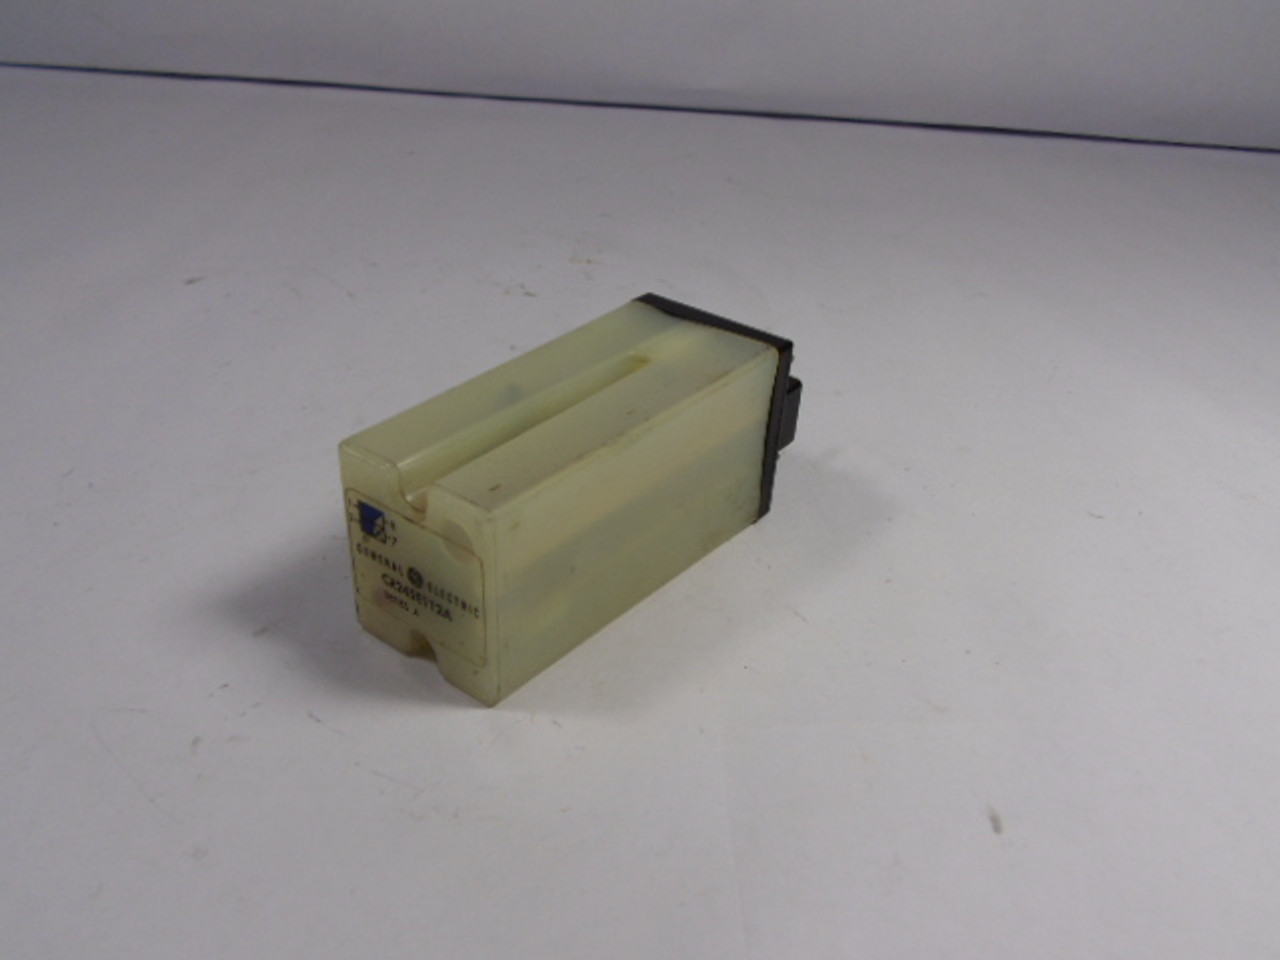 General Electric CR245E112A Relay SER A USED